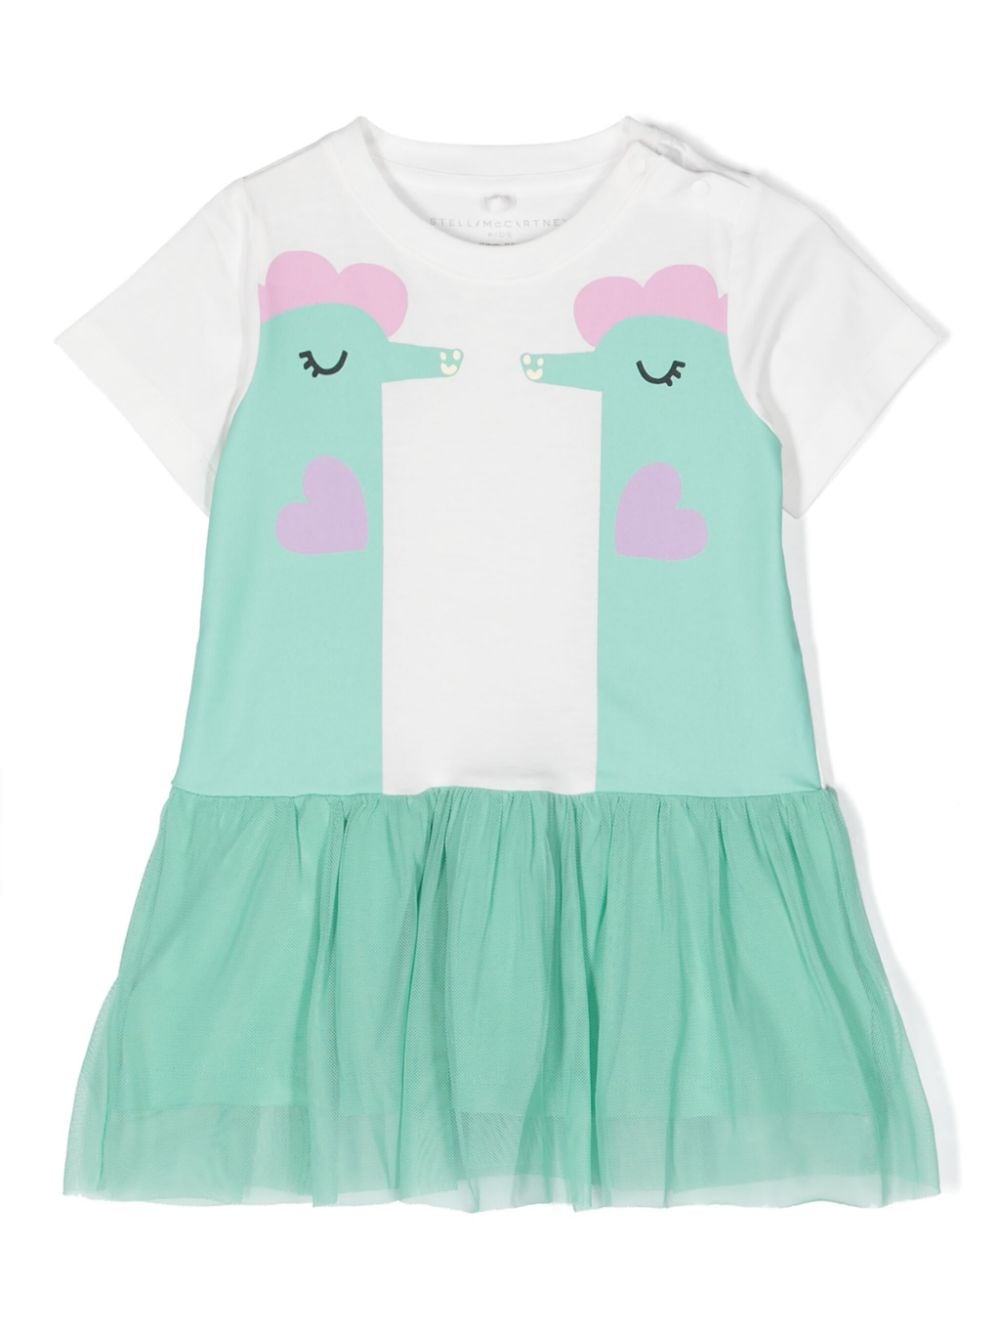 White and green dress for baby girls with print